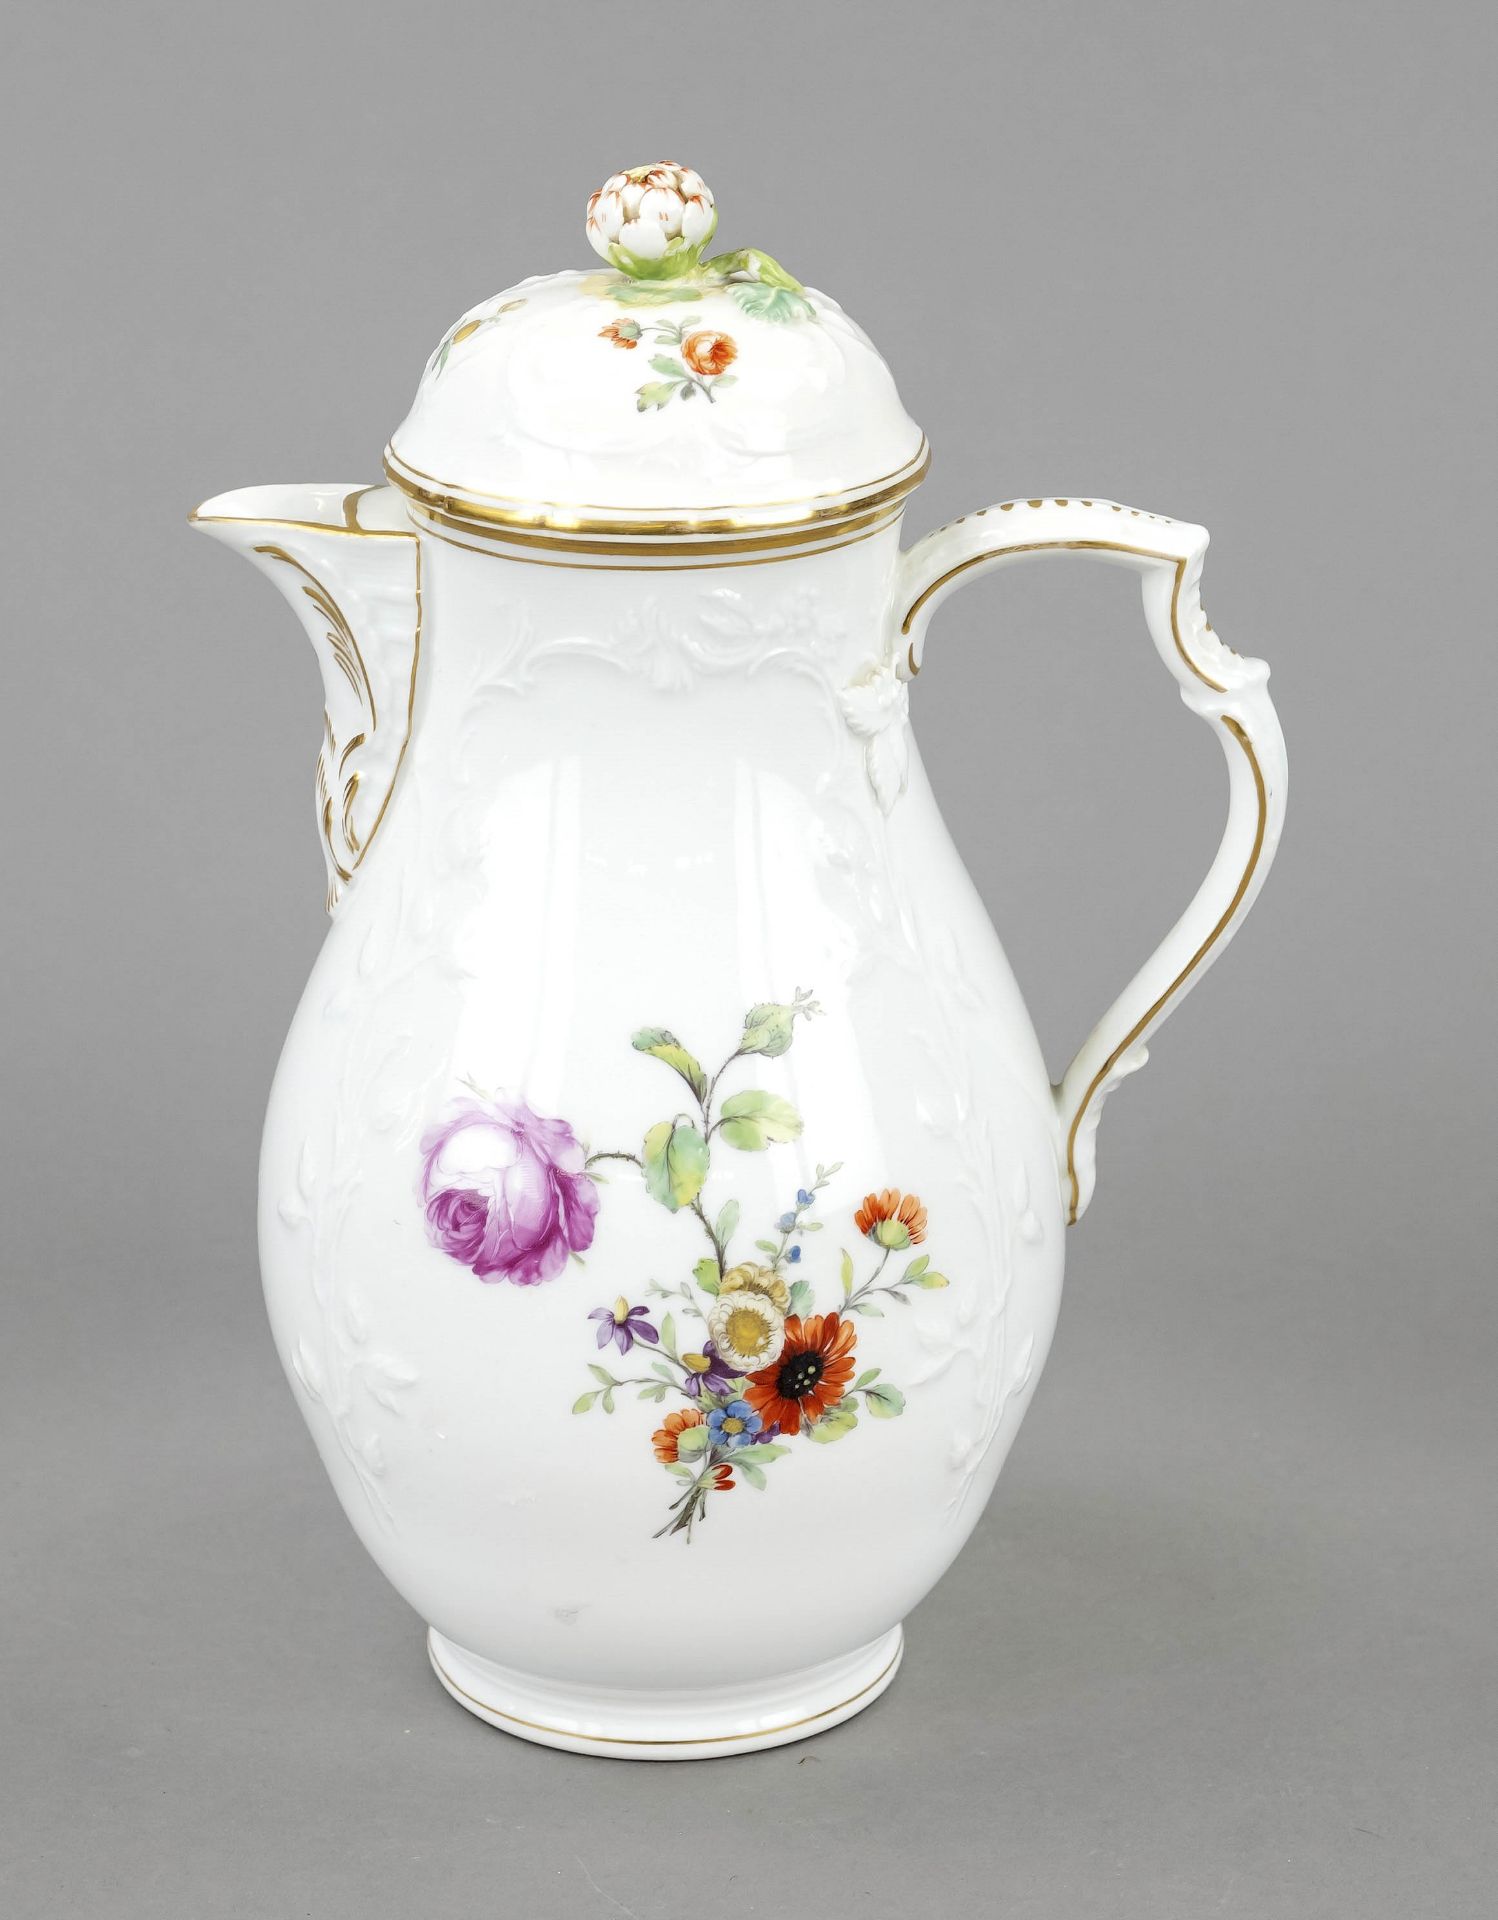 Coffee pot, KPM Berlin, c. 1800, 1st choice, with floral relief decoration and polychrome flower